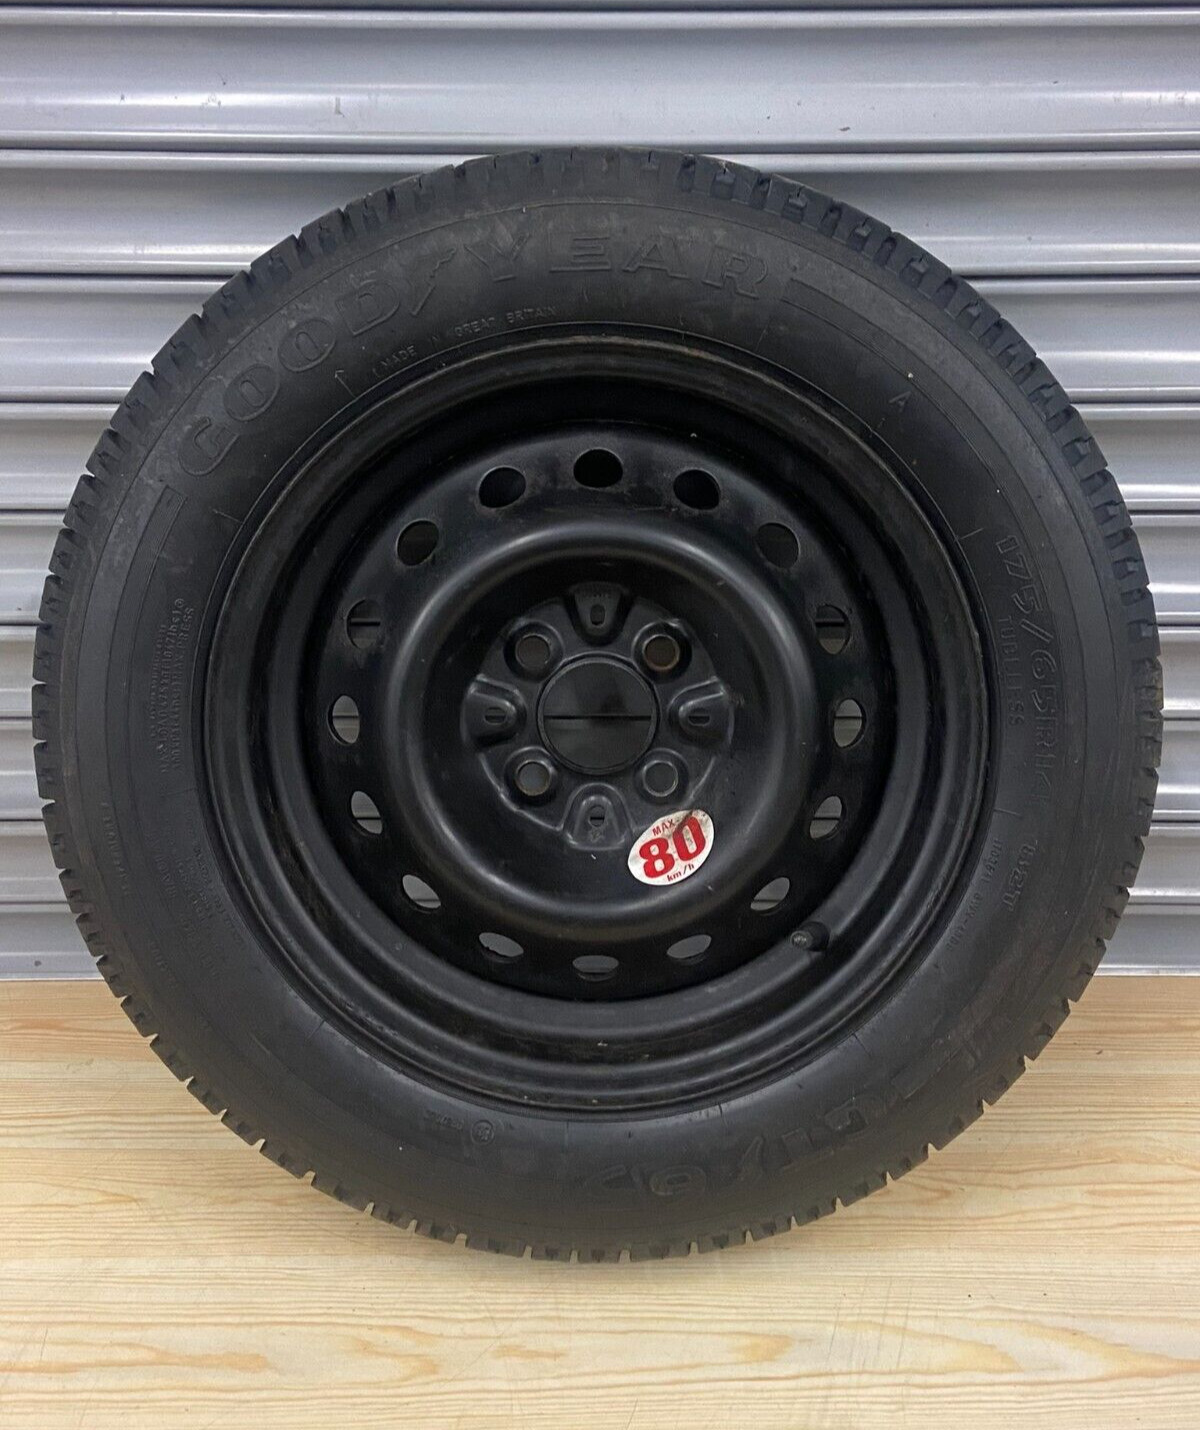 ROVER MGF MG TF 135 160 1.8 SPARE STEEL WHEEL & TYRE 175/65/R14 SOLID ORDER-VVC